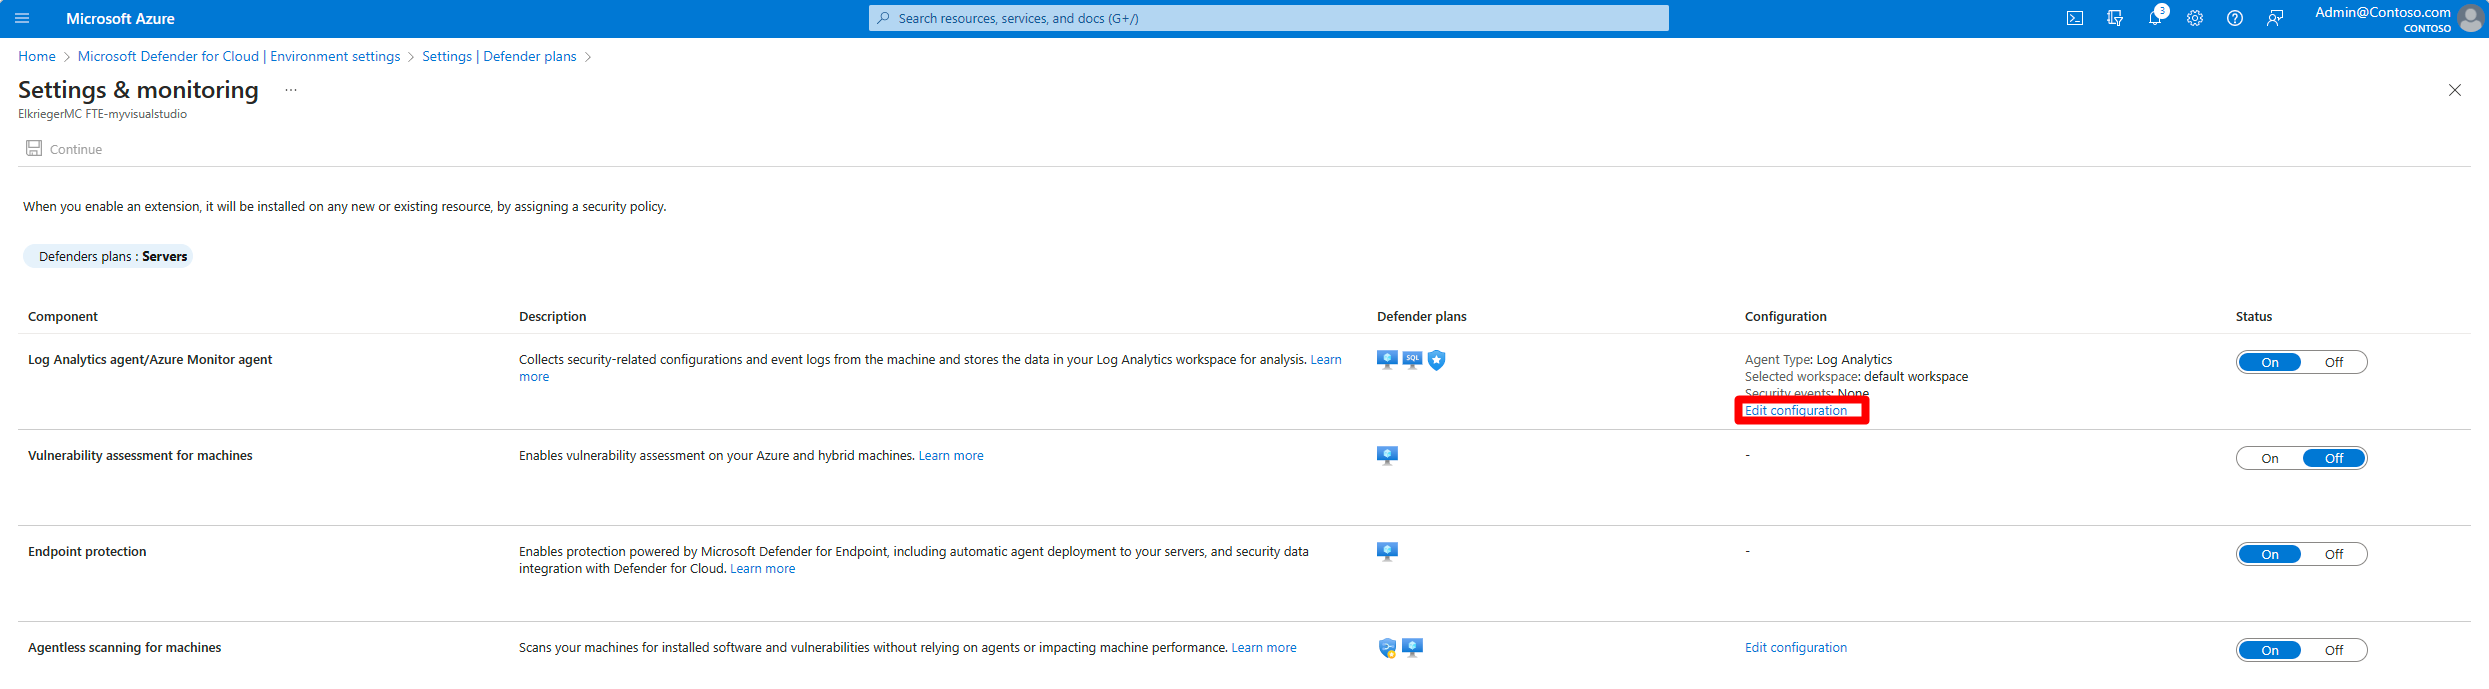 Screenshot showing where to select edit configuration for Log Analytics agent/Azure Monitor Agent.